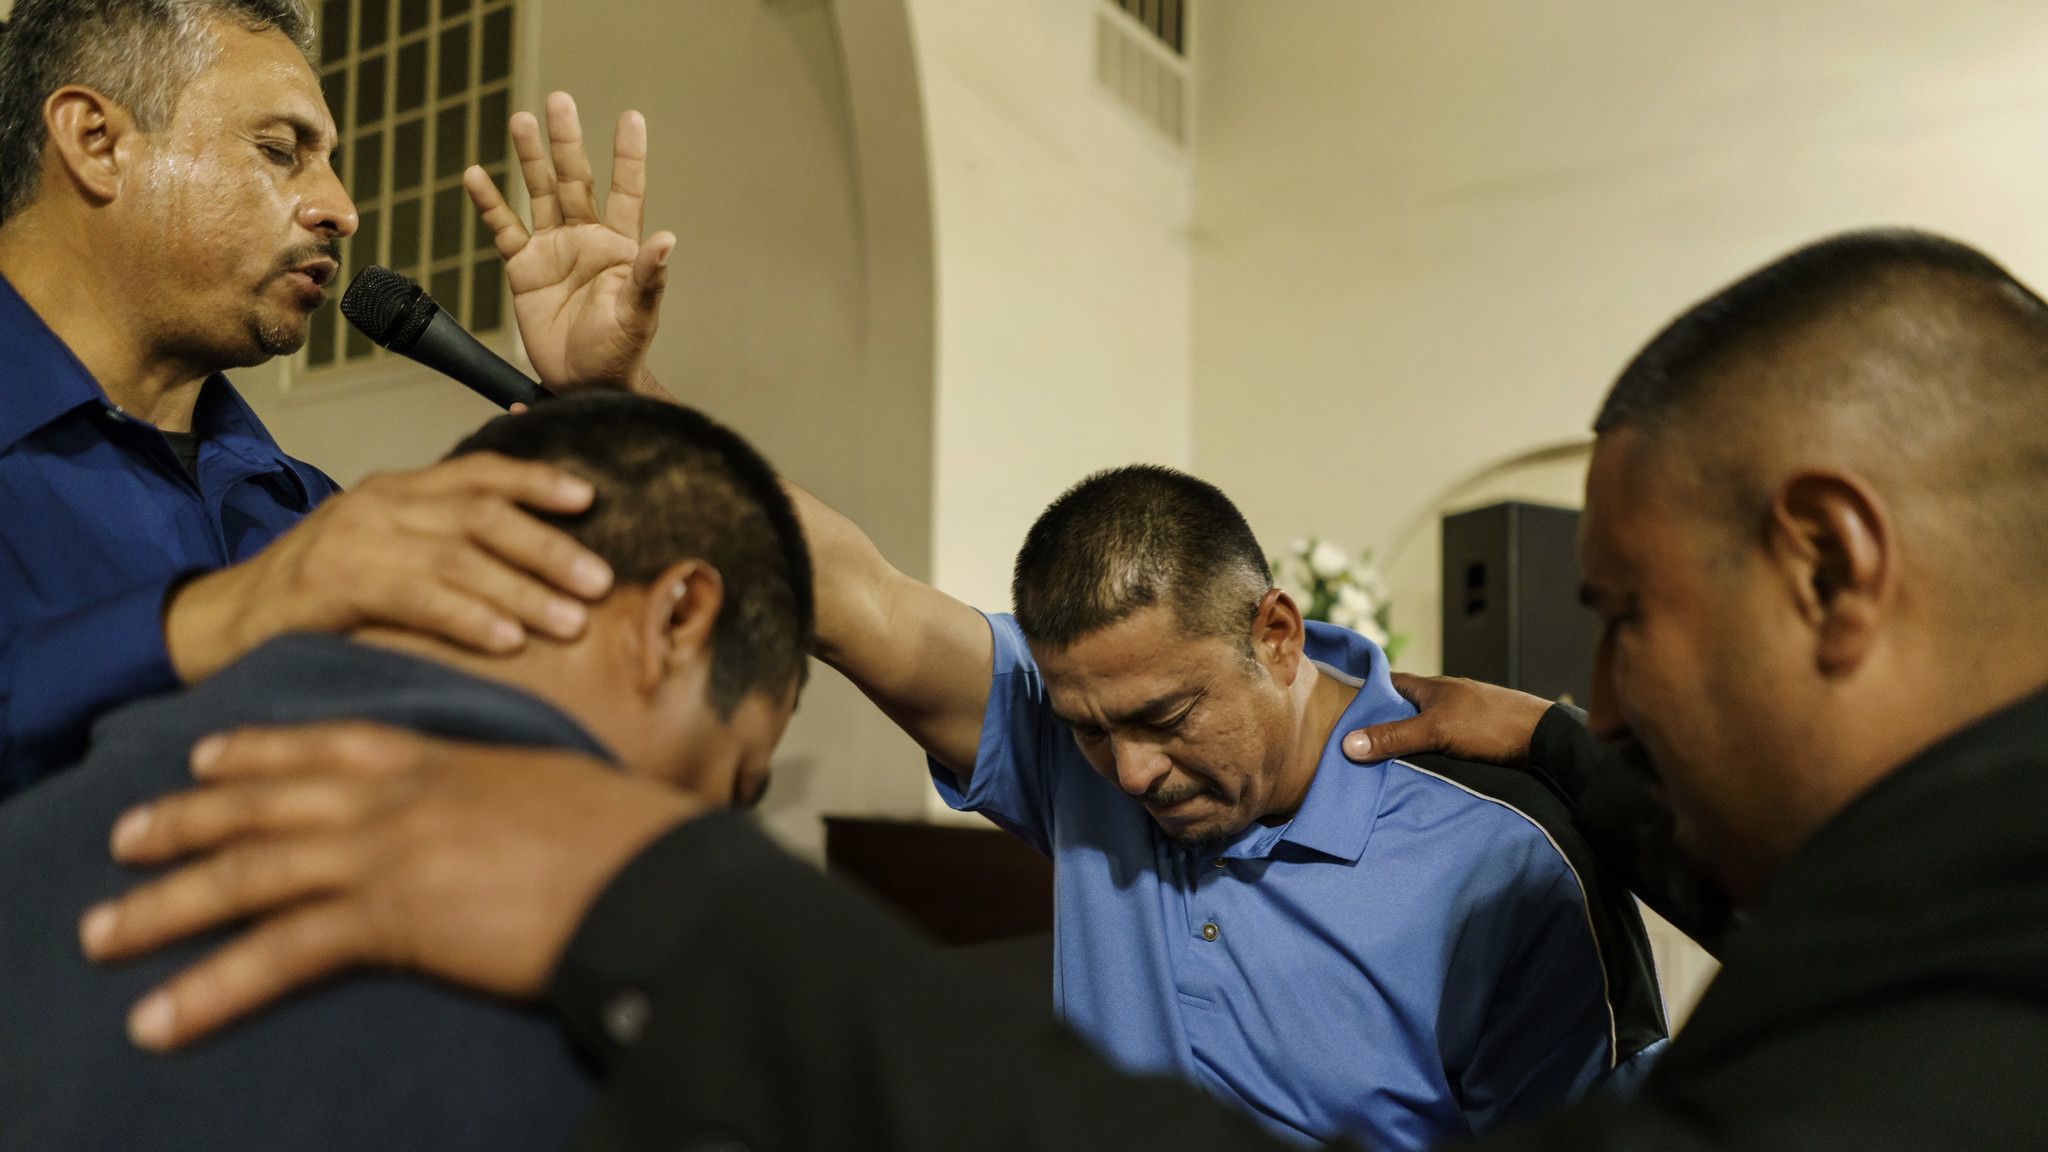 WASCO, CALIF. — WEDNESDAY, MARCH 7, 2018: Pastor Guillermo Aceves, far left, and other El Aposento